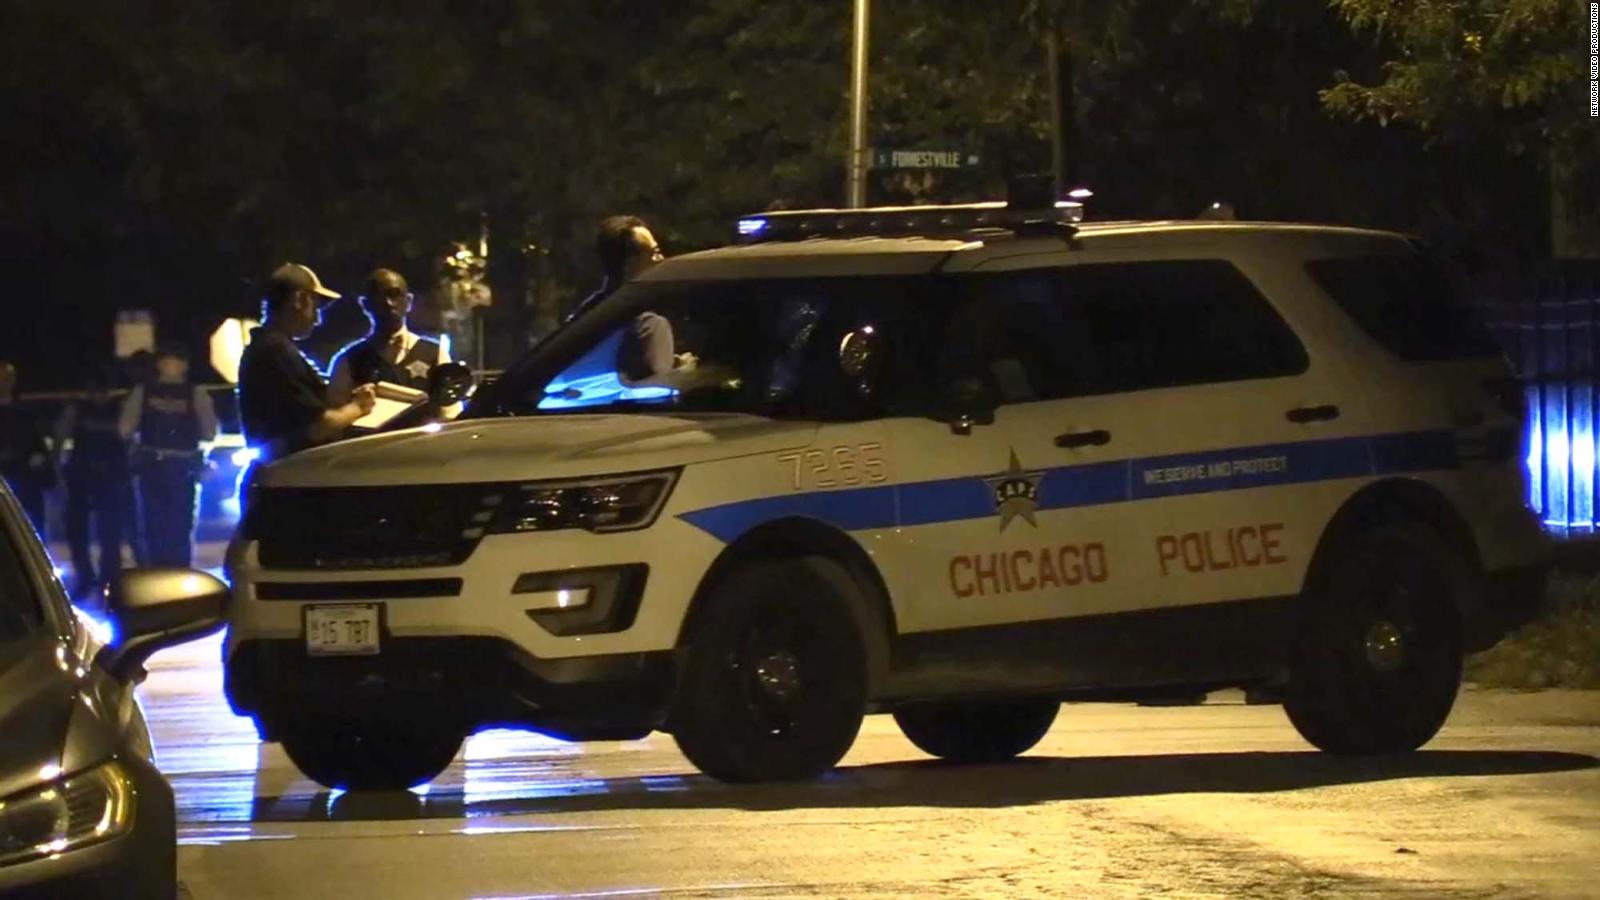 most recent shooting in chicago